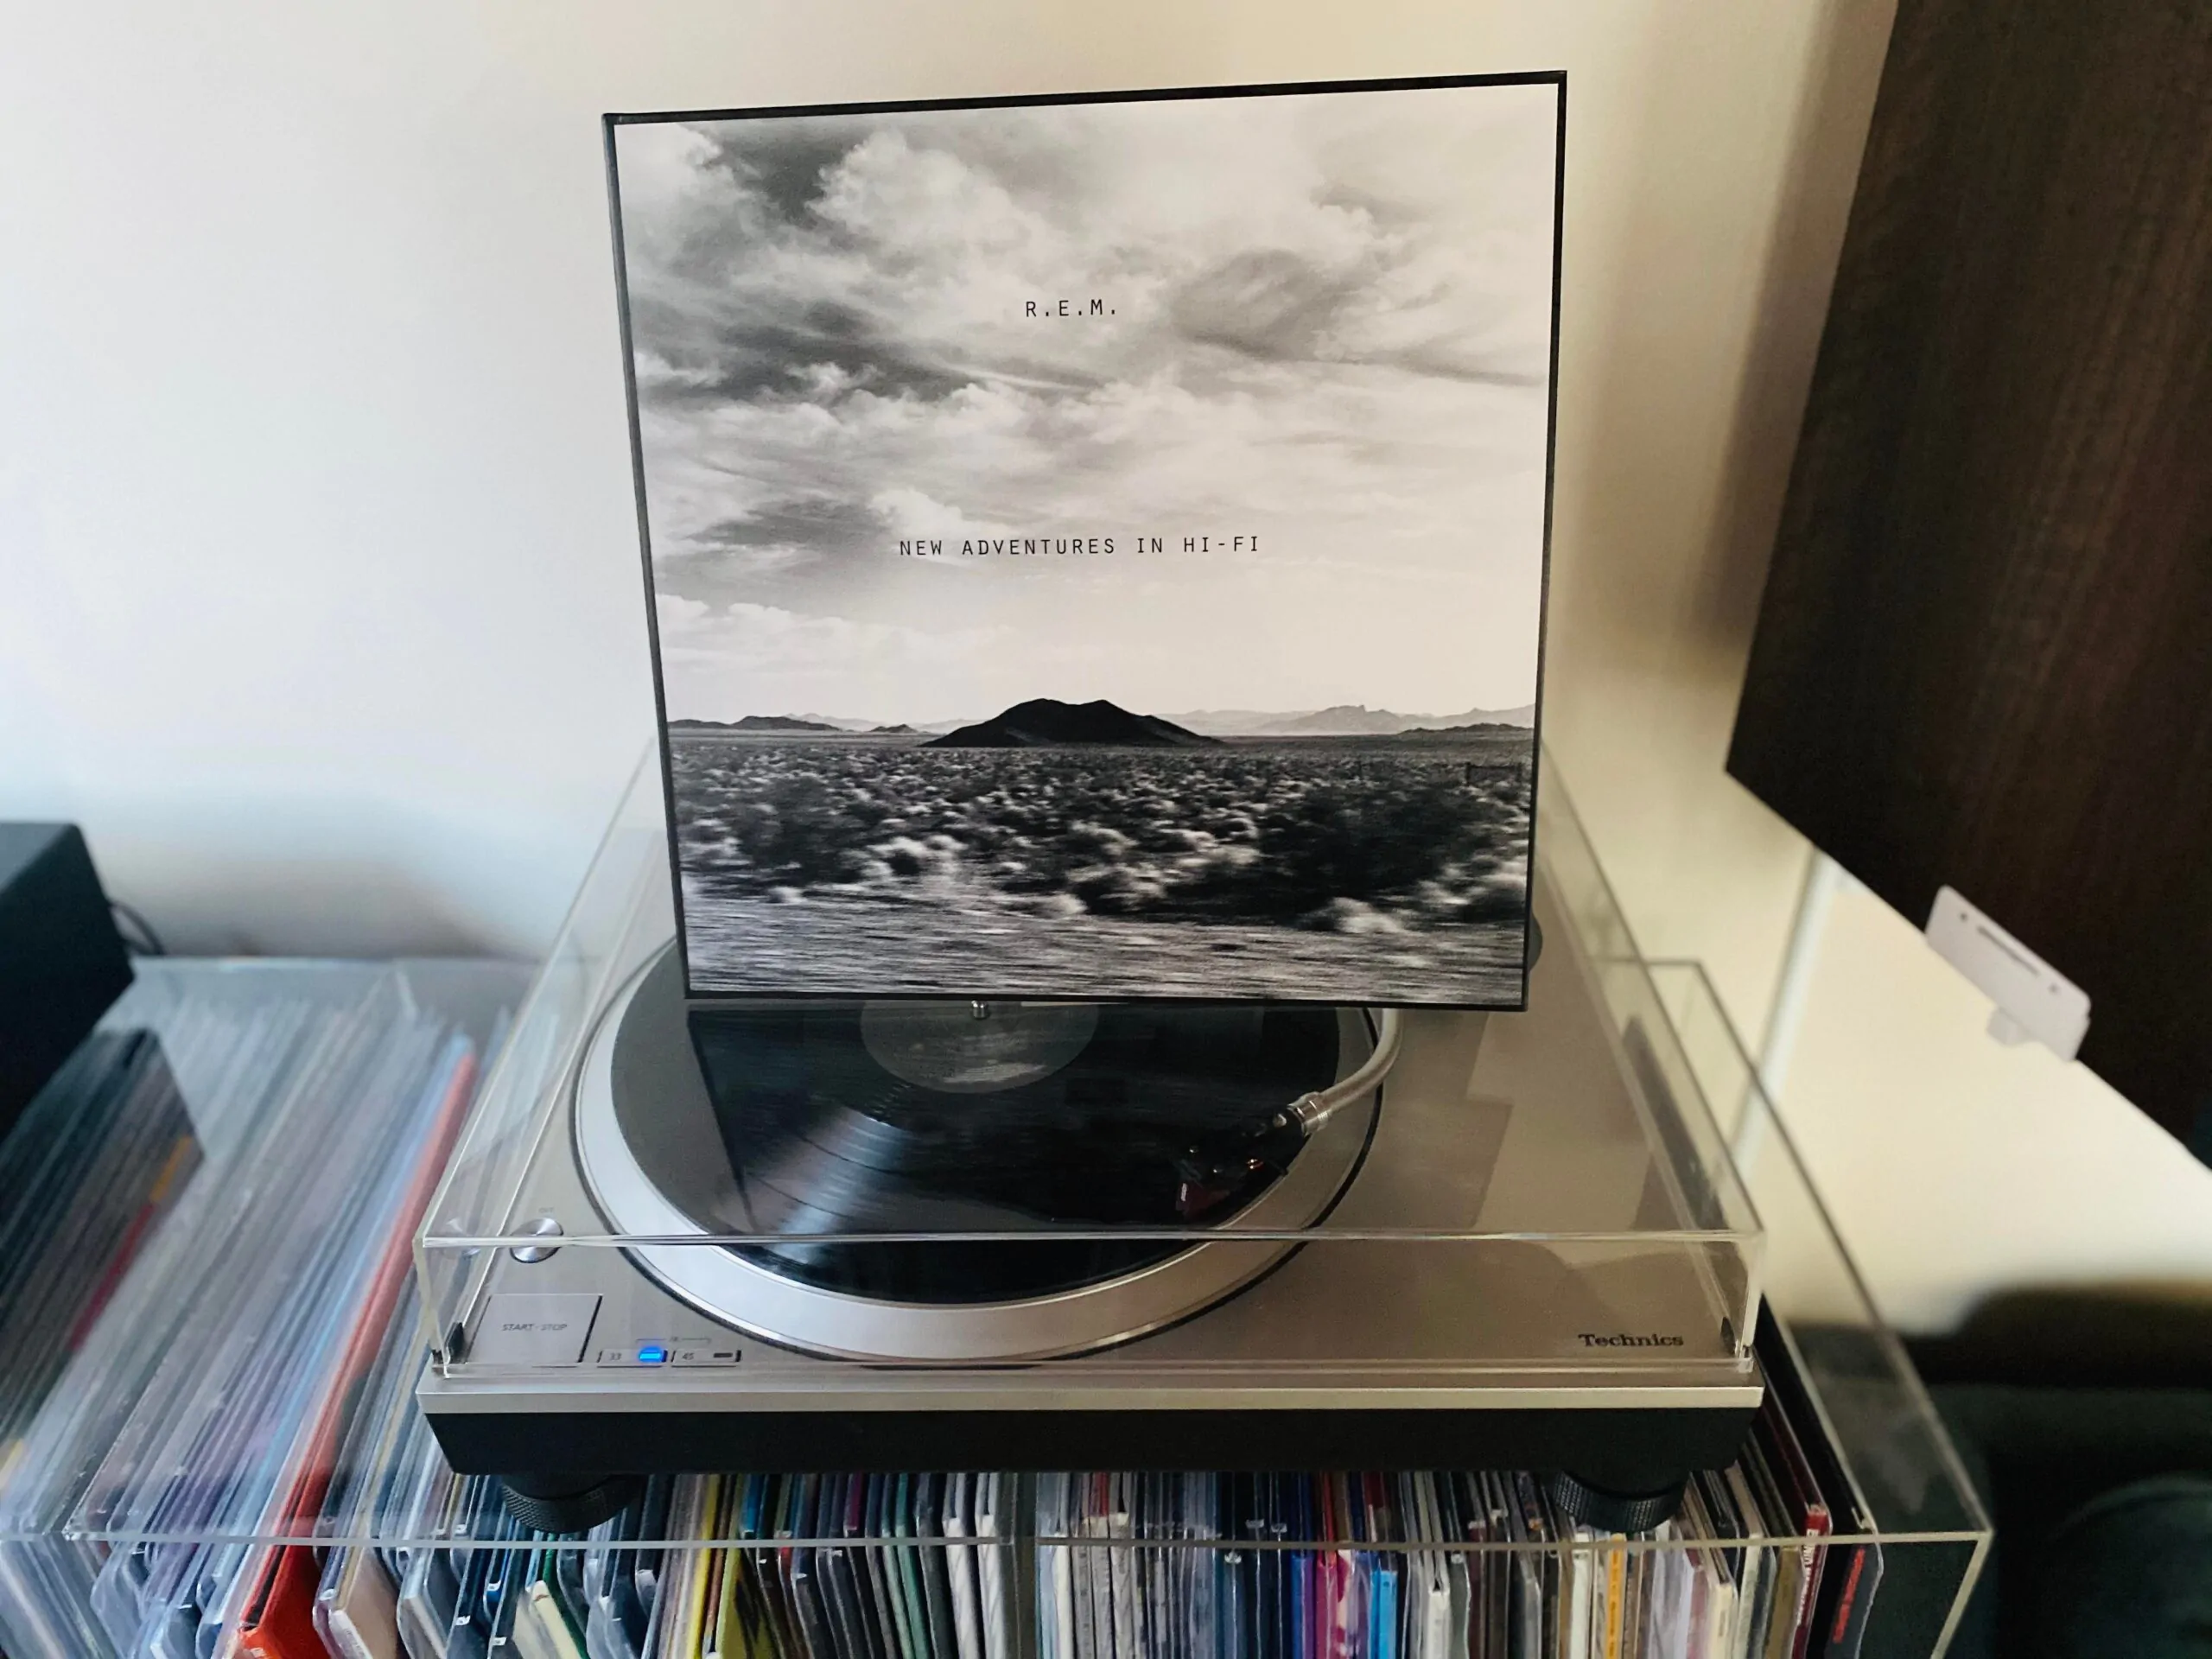 ON THE TURNTABLE: R.E.M. – New Adventures in Hi-Fi